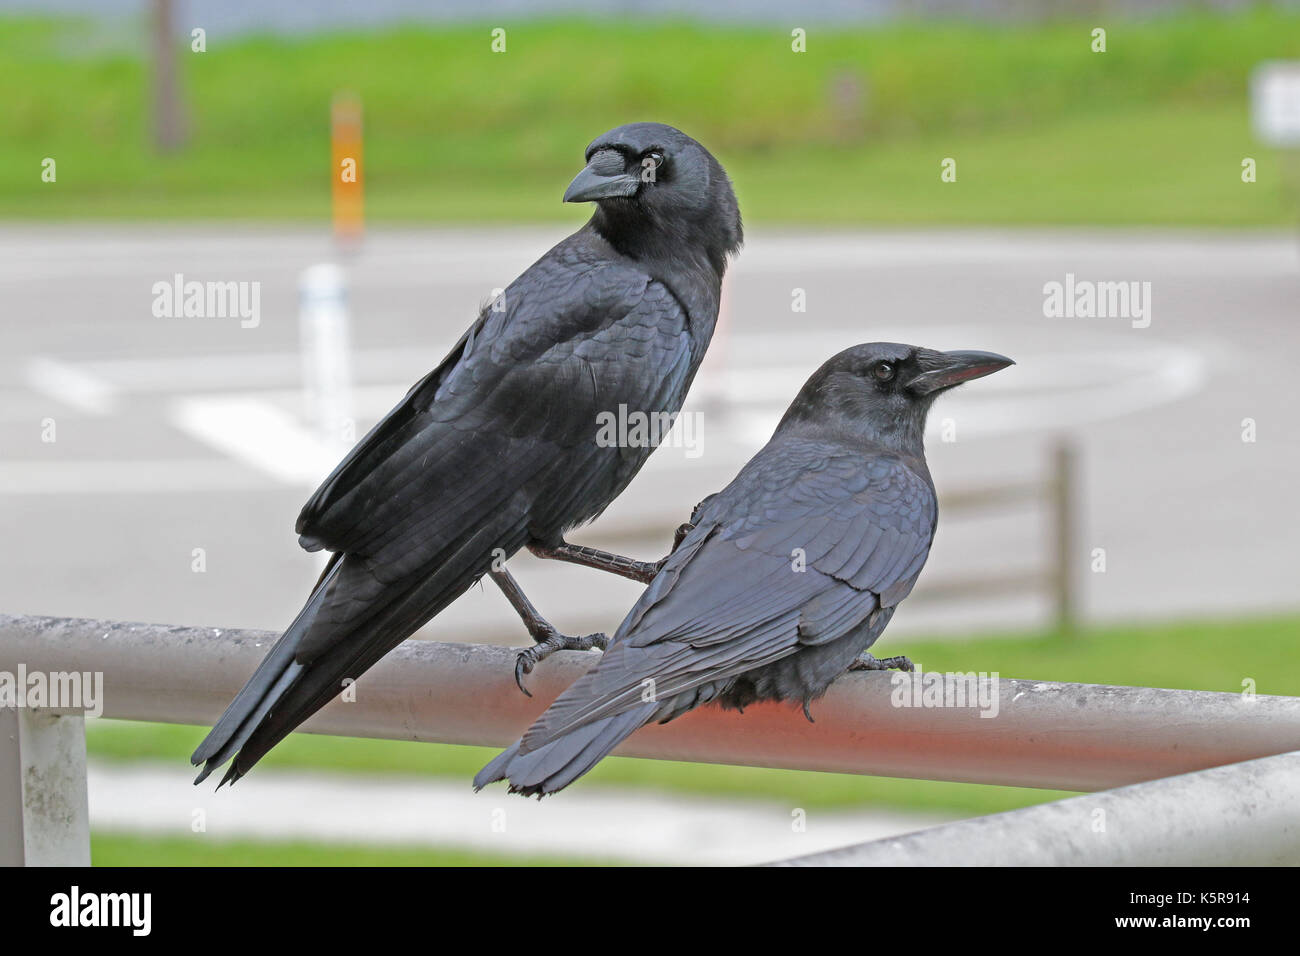 Pair of American crows interacting Stock Photo